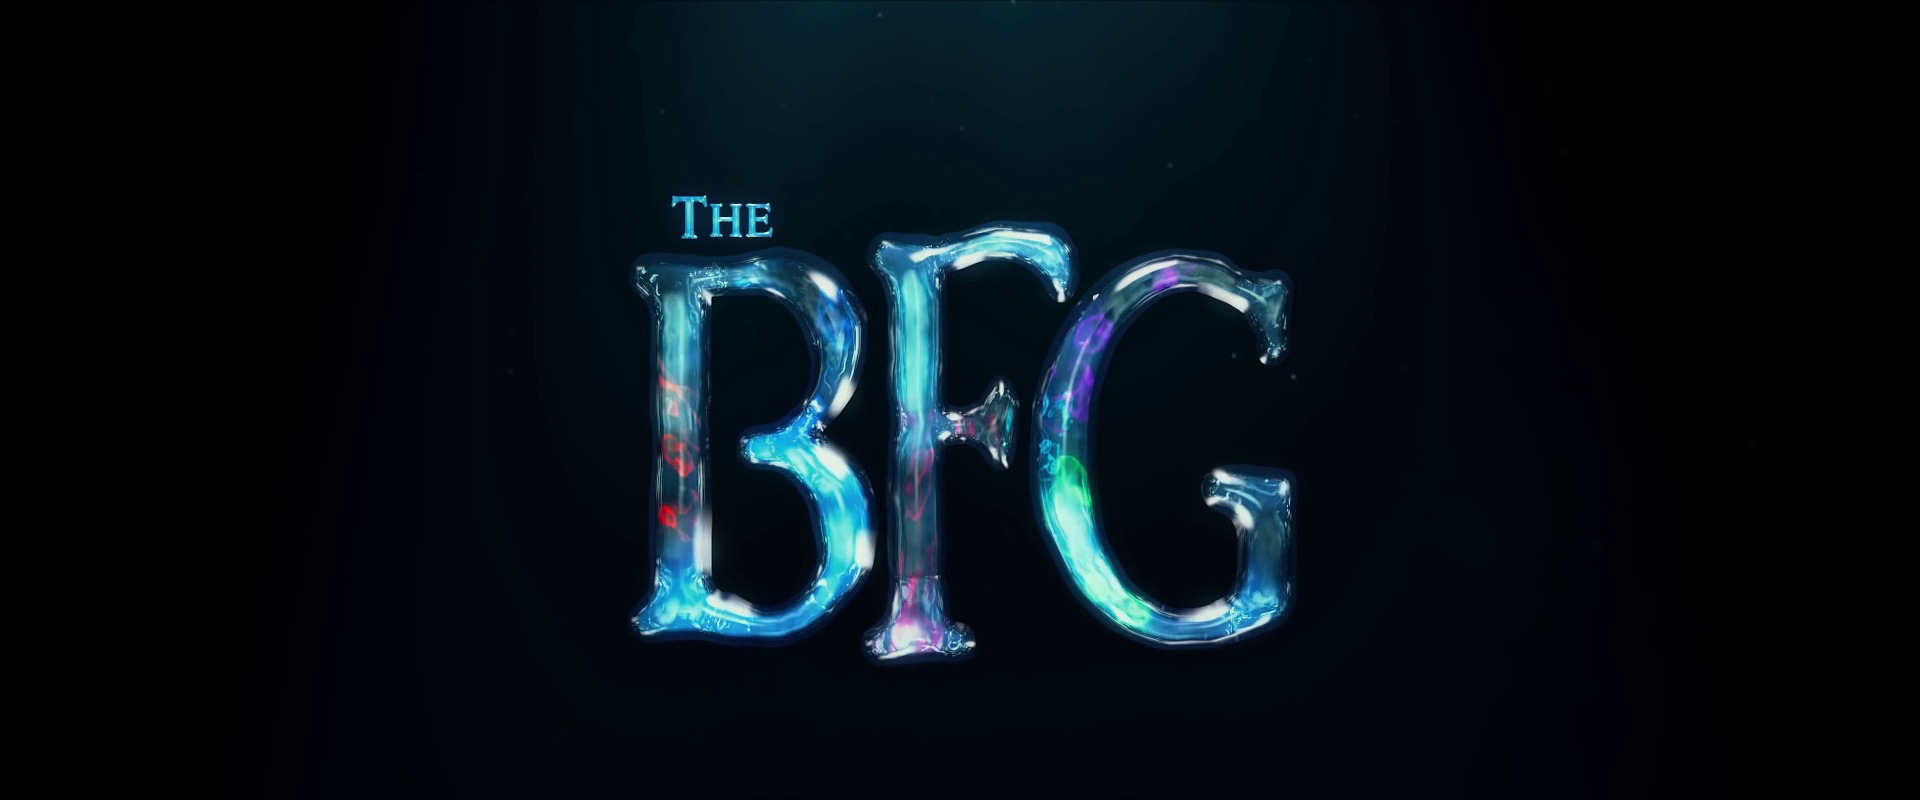 Gather all you human beans, ‘The BFG’ teaser is here